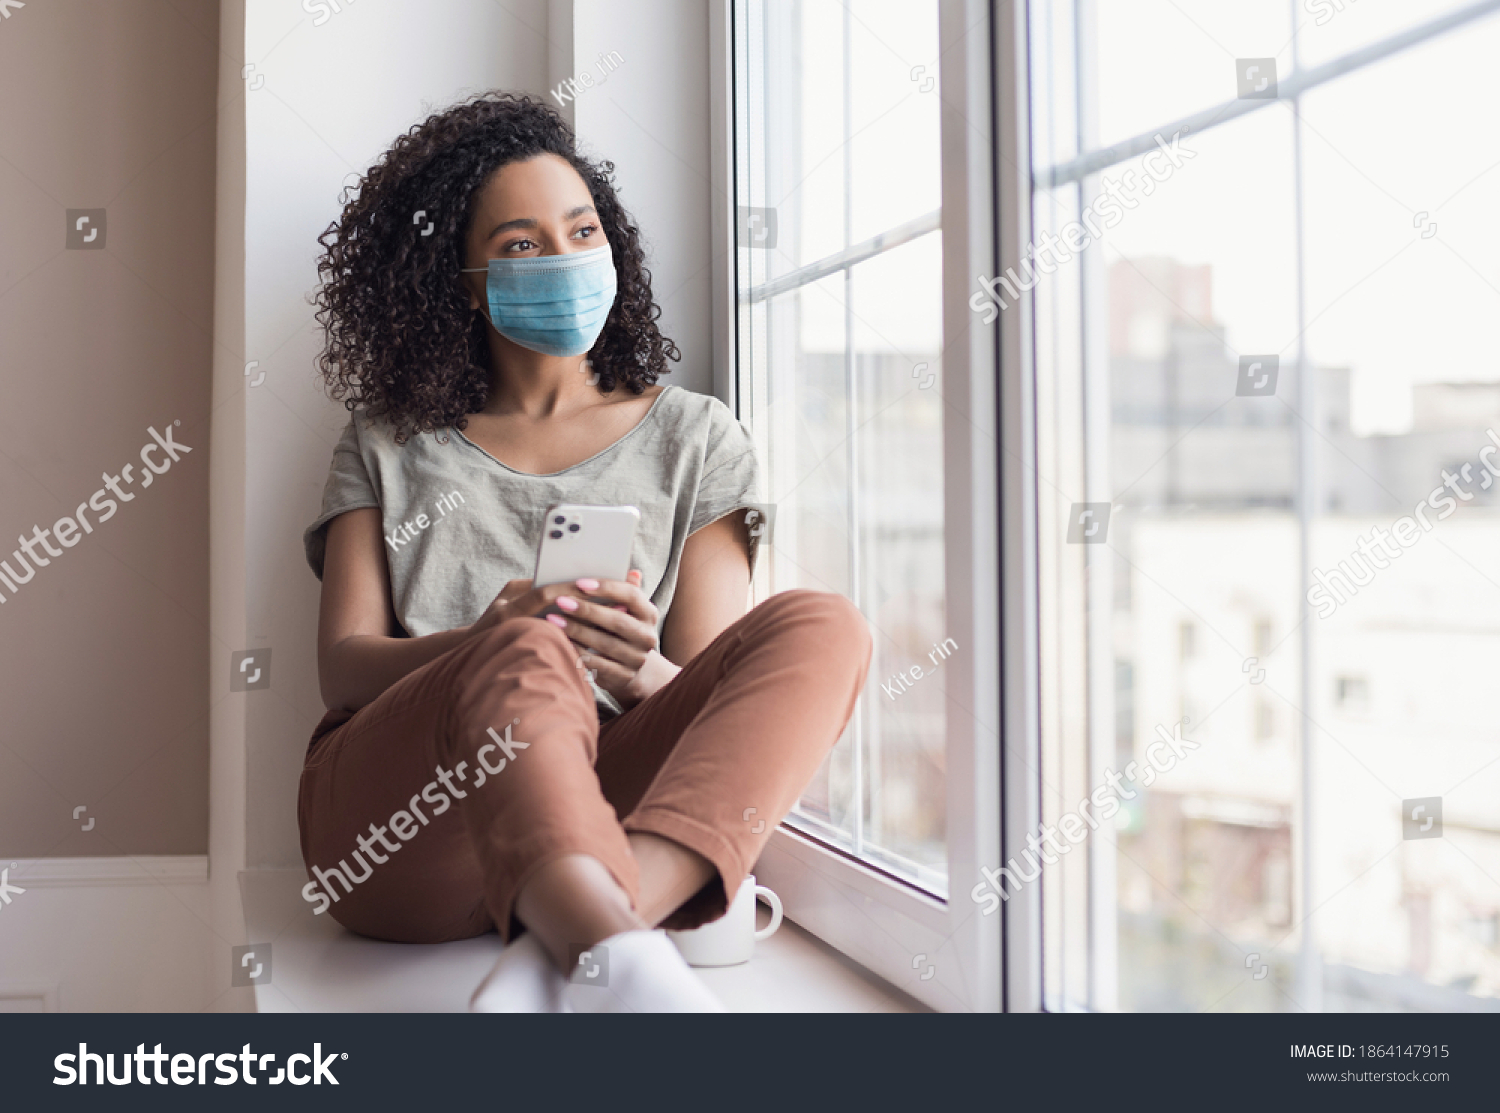 Sad woman alone during coronavirus pandemic wearing face mask indoors at home for social distancing. Mixed race girl looking at window. Anxiety, stress, lockdown, mental health crisis concept #1864147915